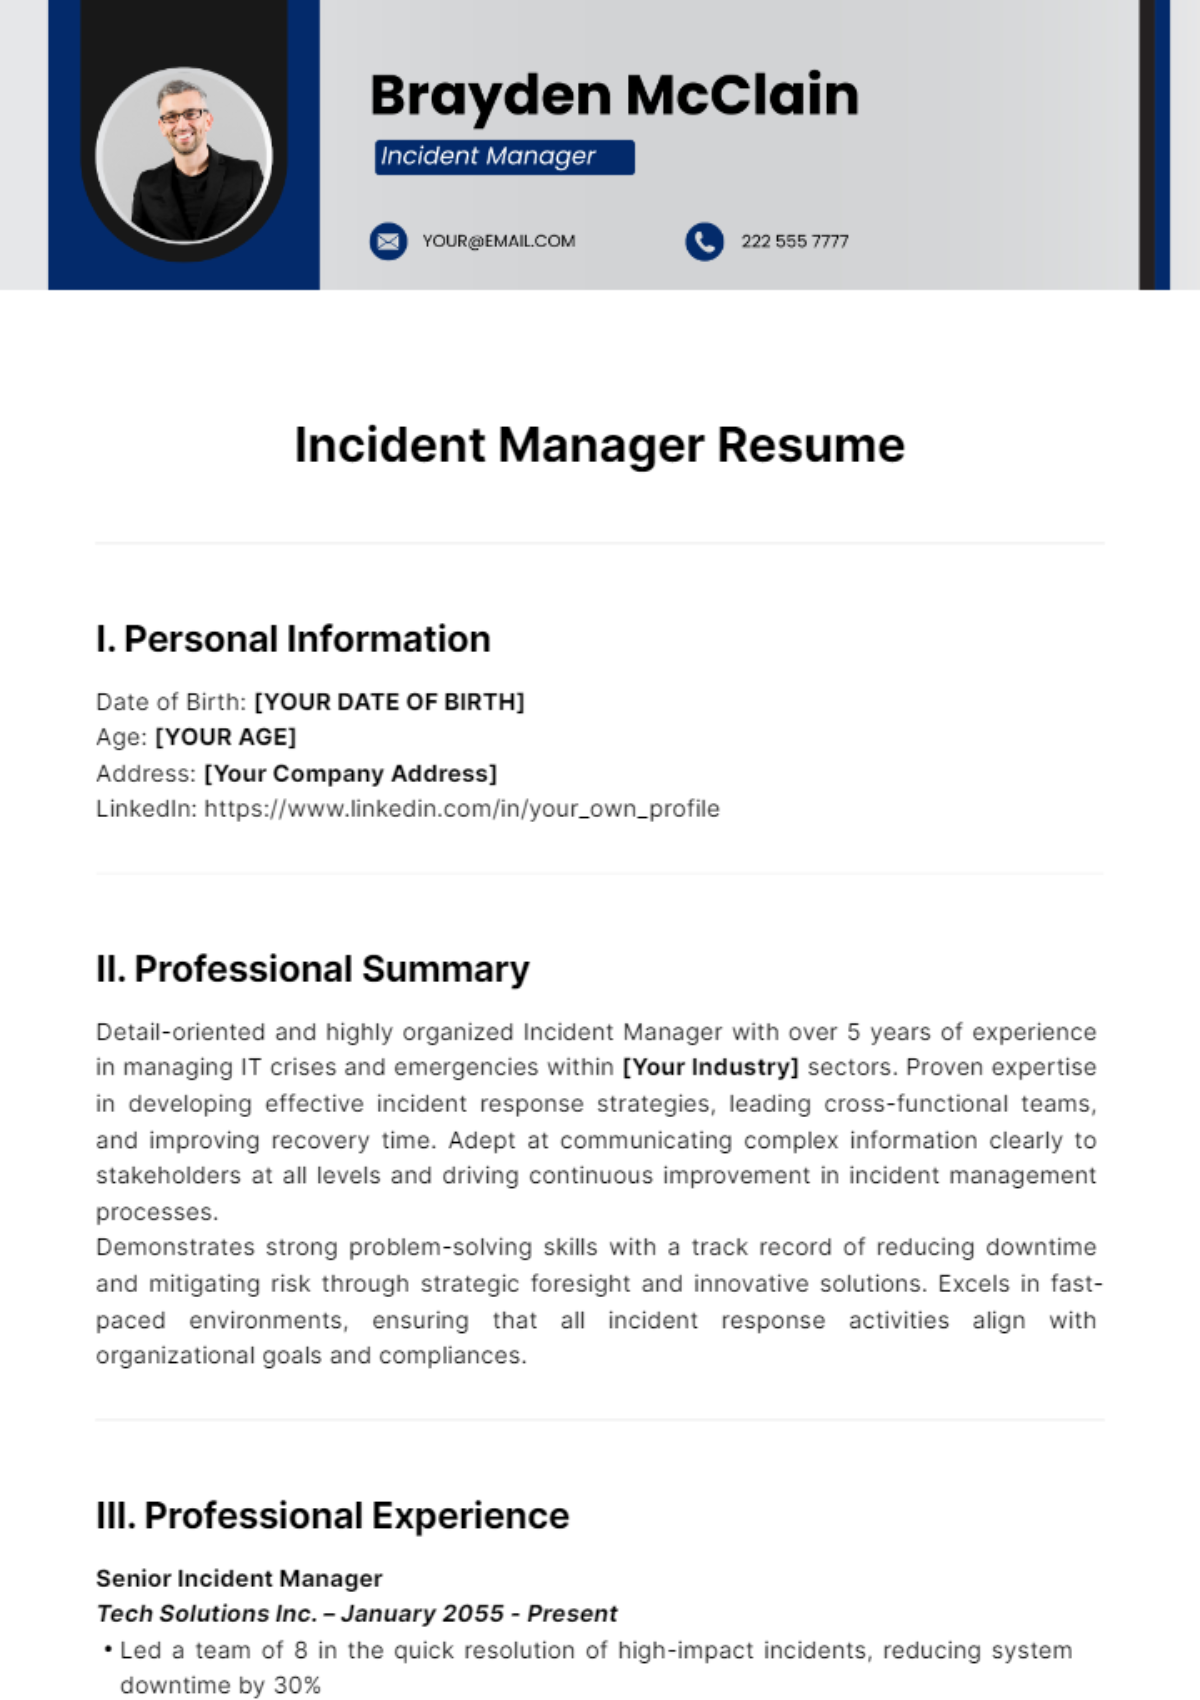 Incident Manager Resume Template